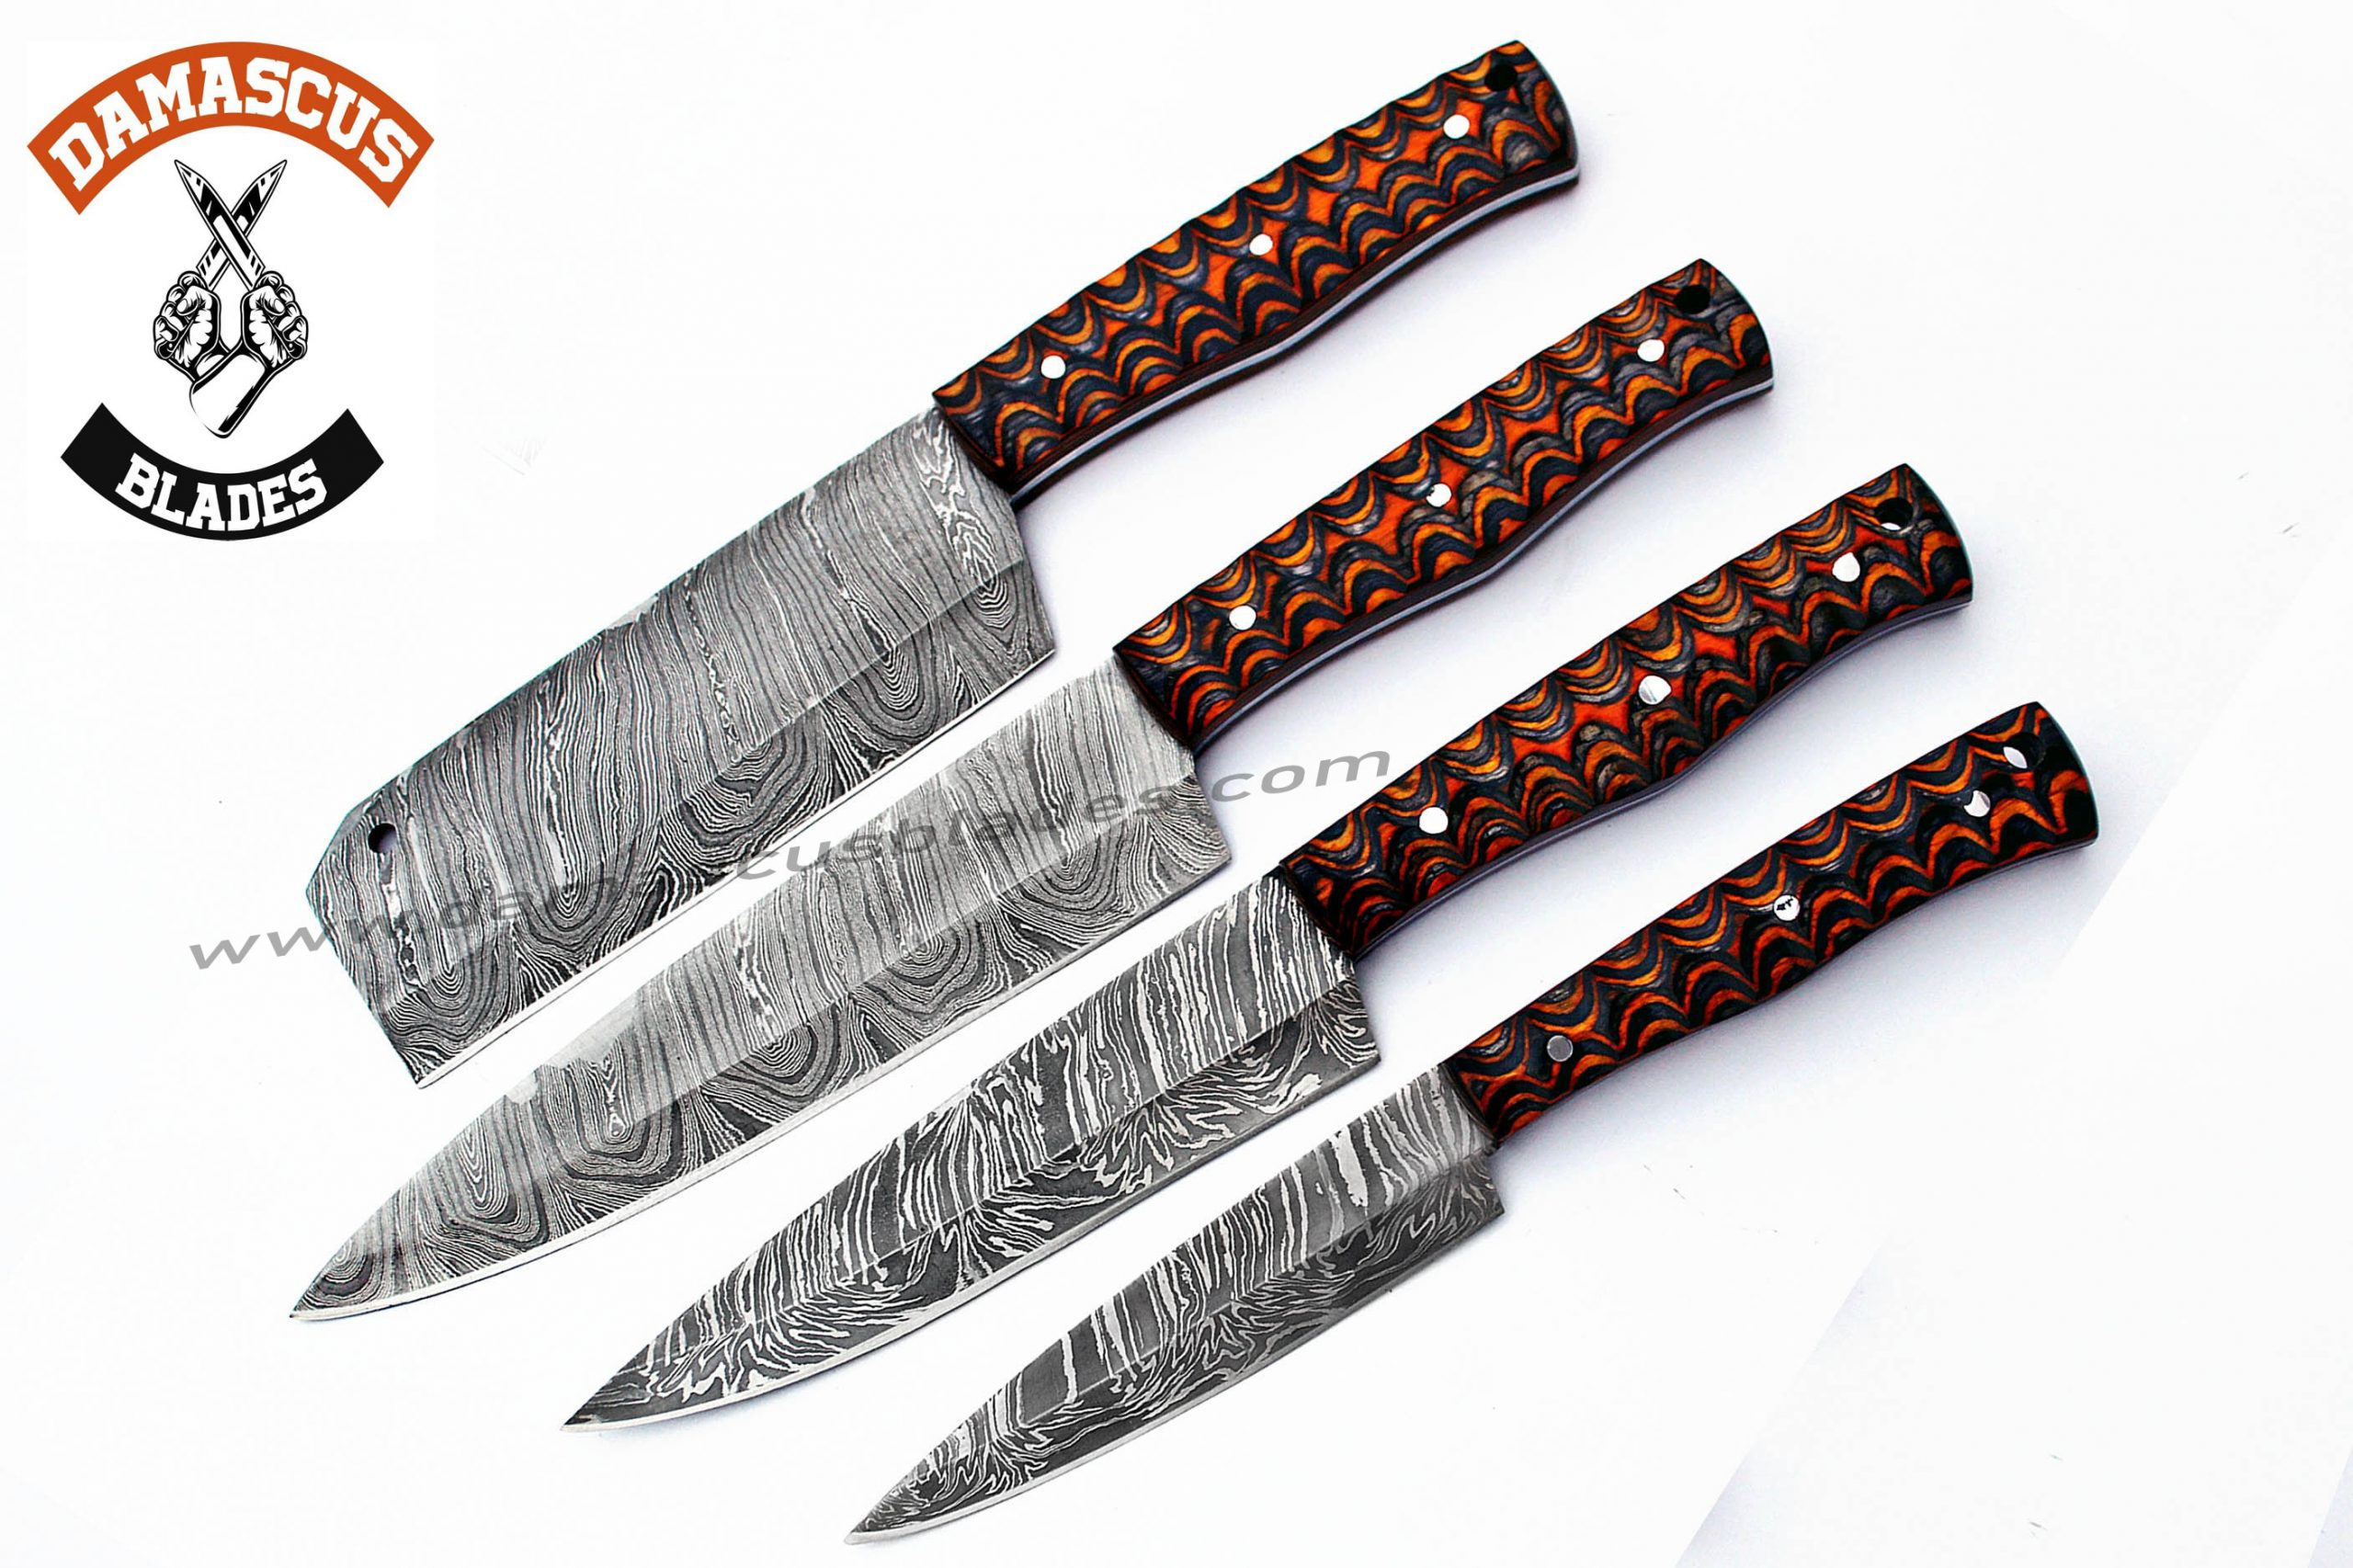 Fancy kitchen knife set with leather roll bag